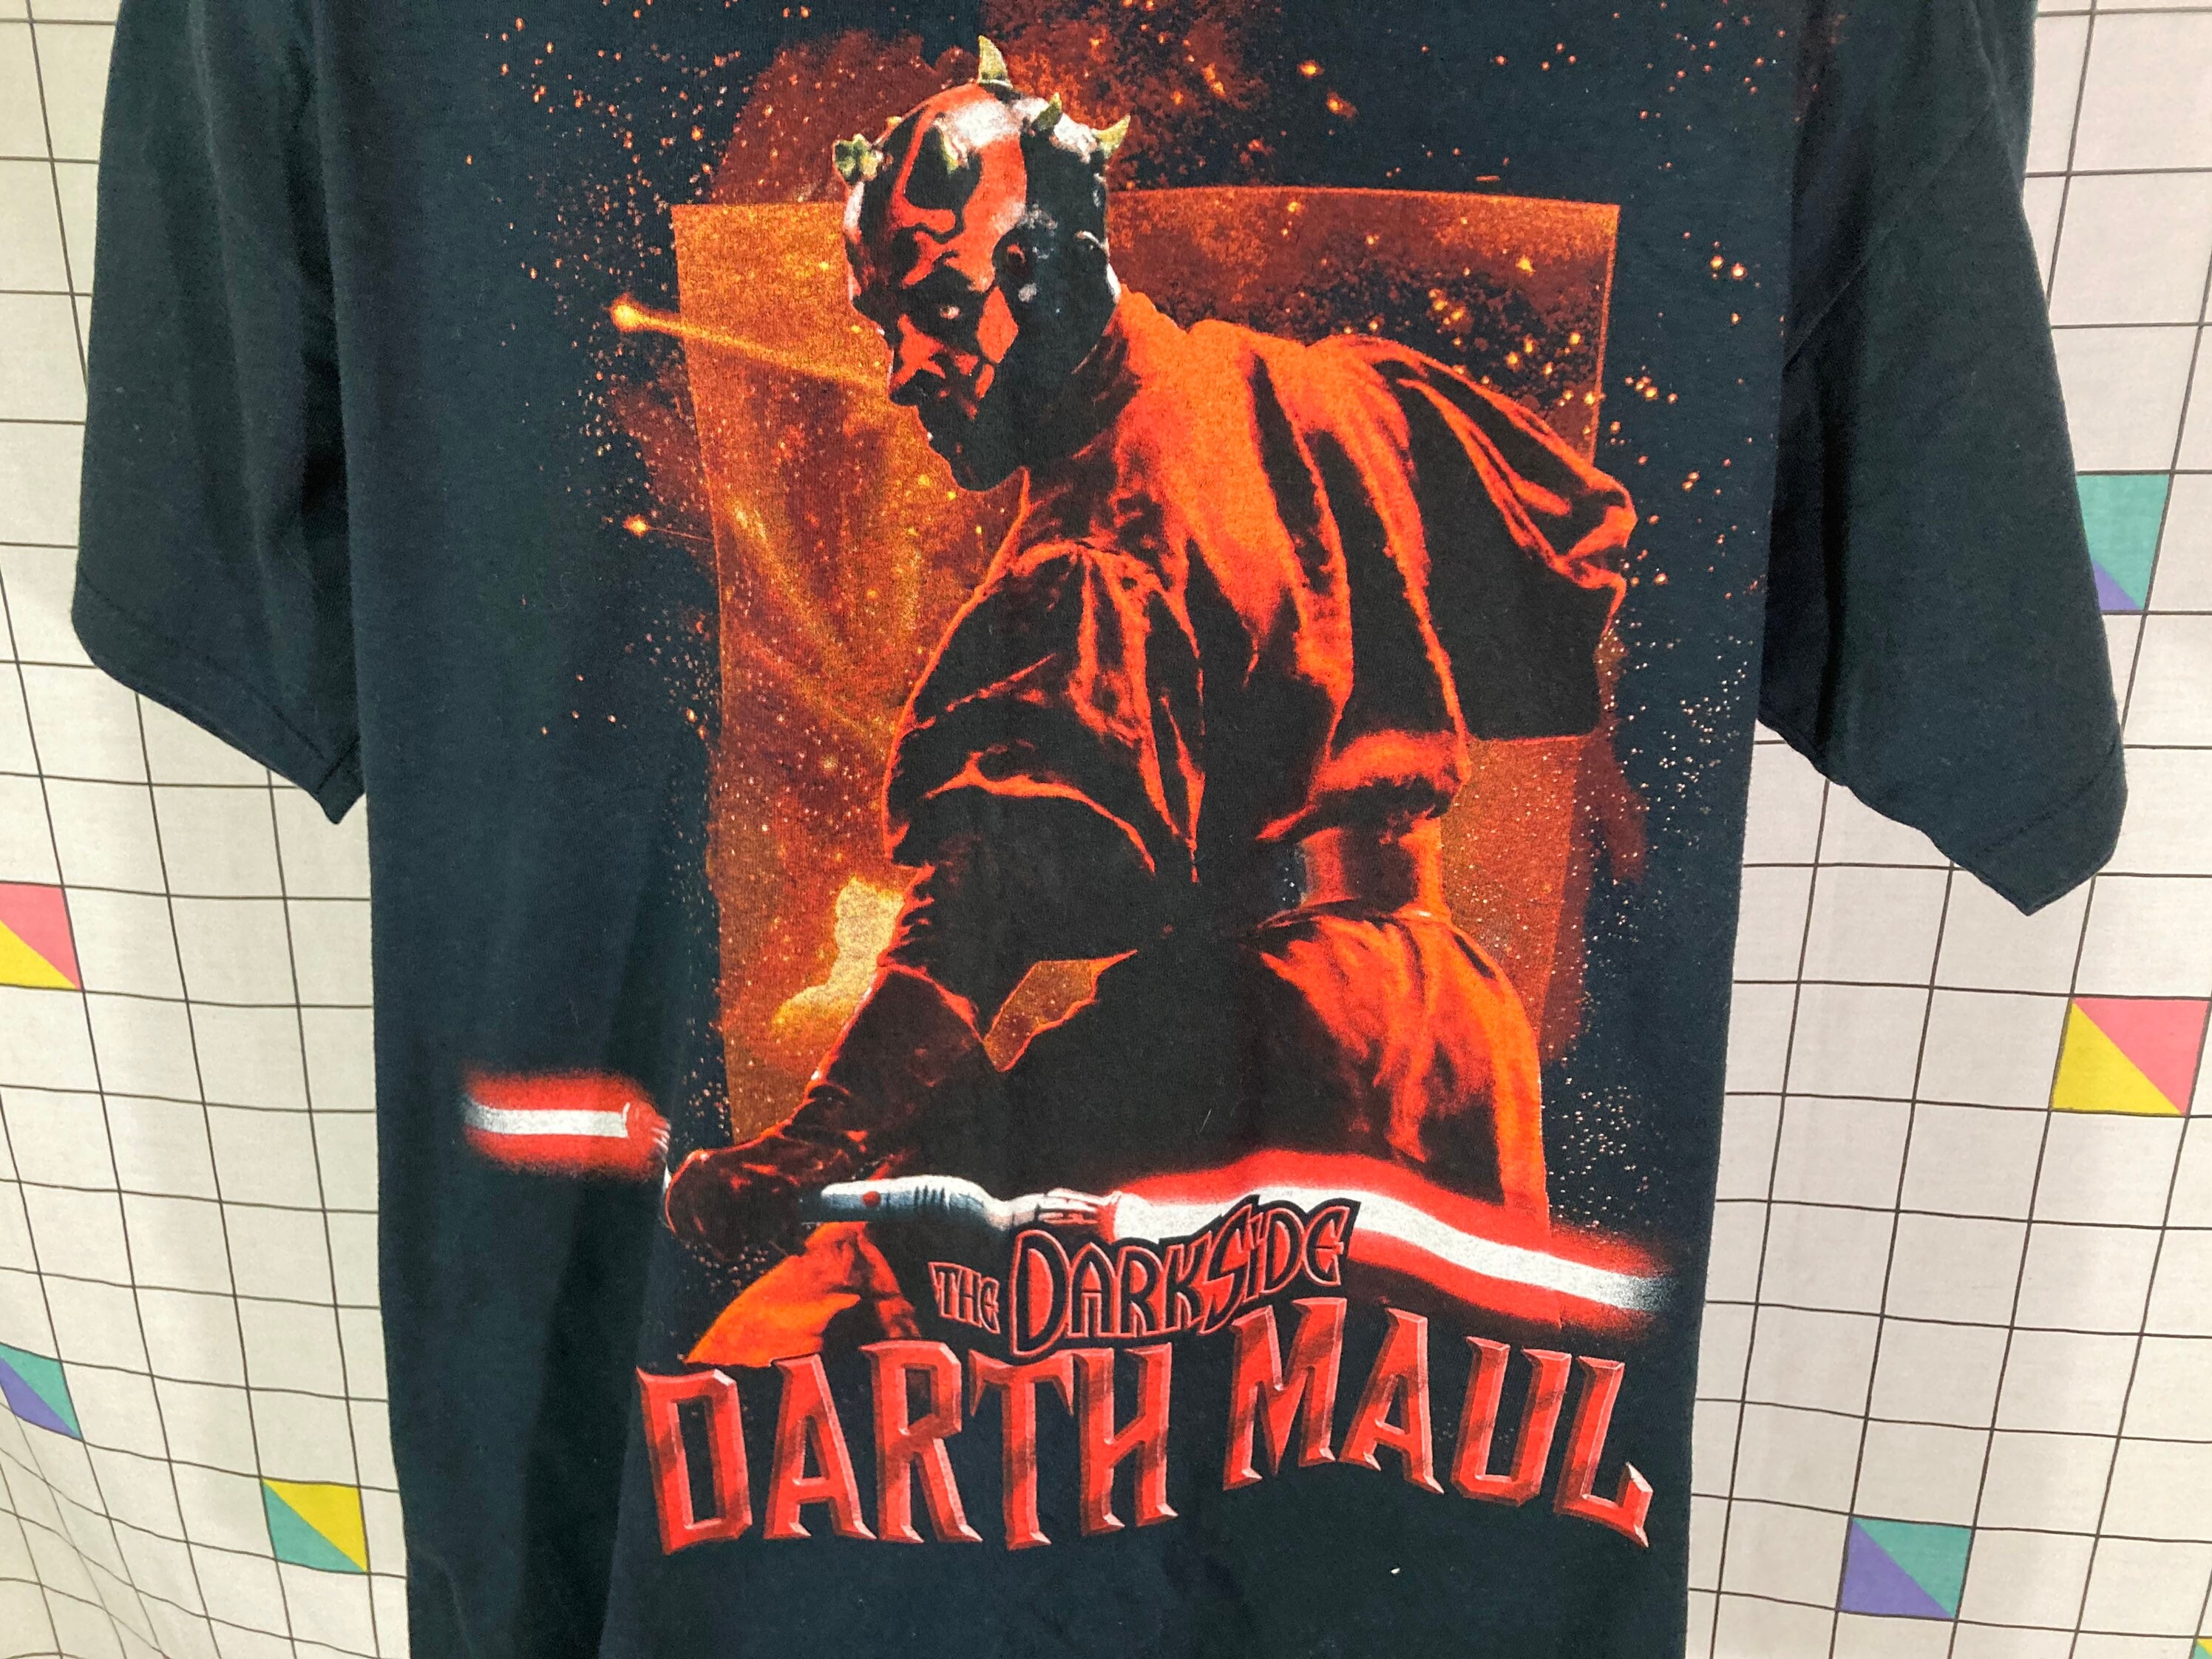 Vintage Star Wars Episode 1 Darth Maul Tee Shirt New With Tags Size Youth XL Kleding Jongenskleding Tops & T-shirts T-shirts T-shirts met print 